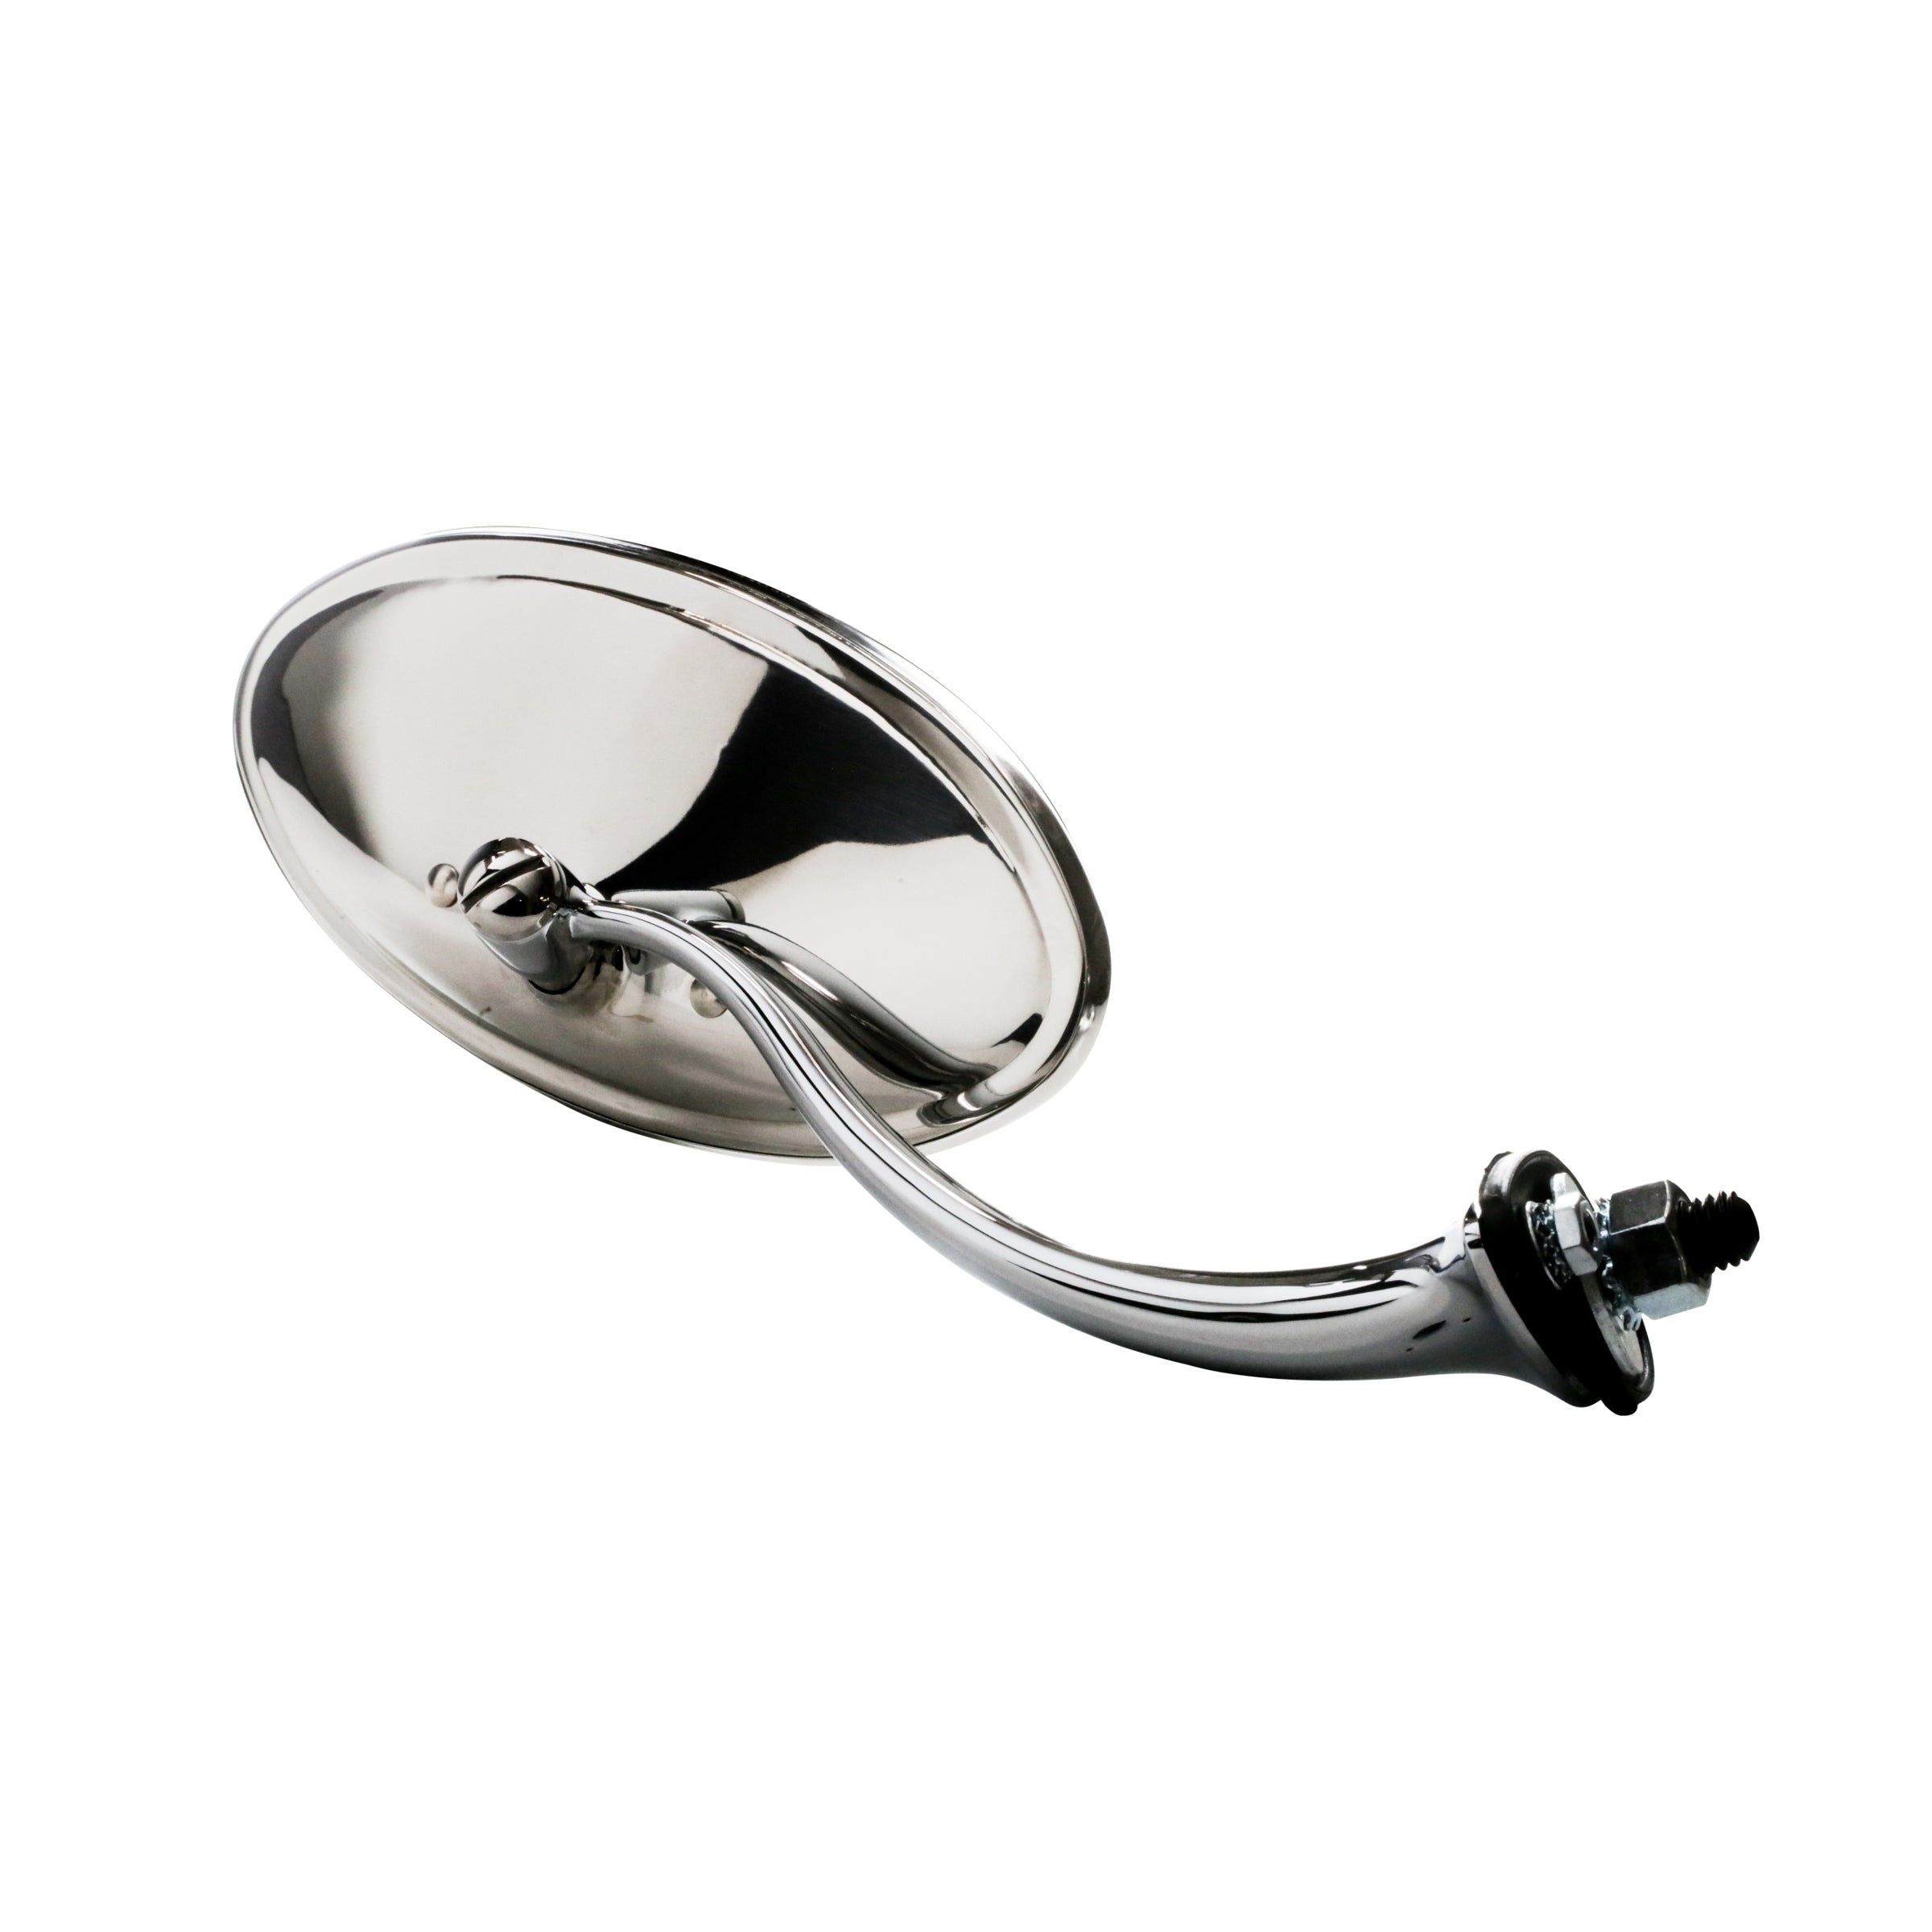 Swan Style Mirror (Oval, Right) • Ford Universal